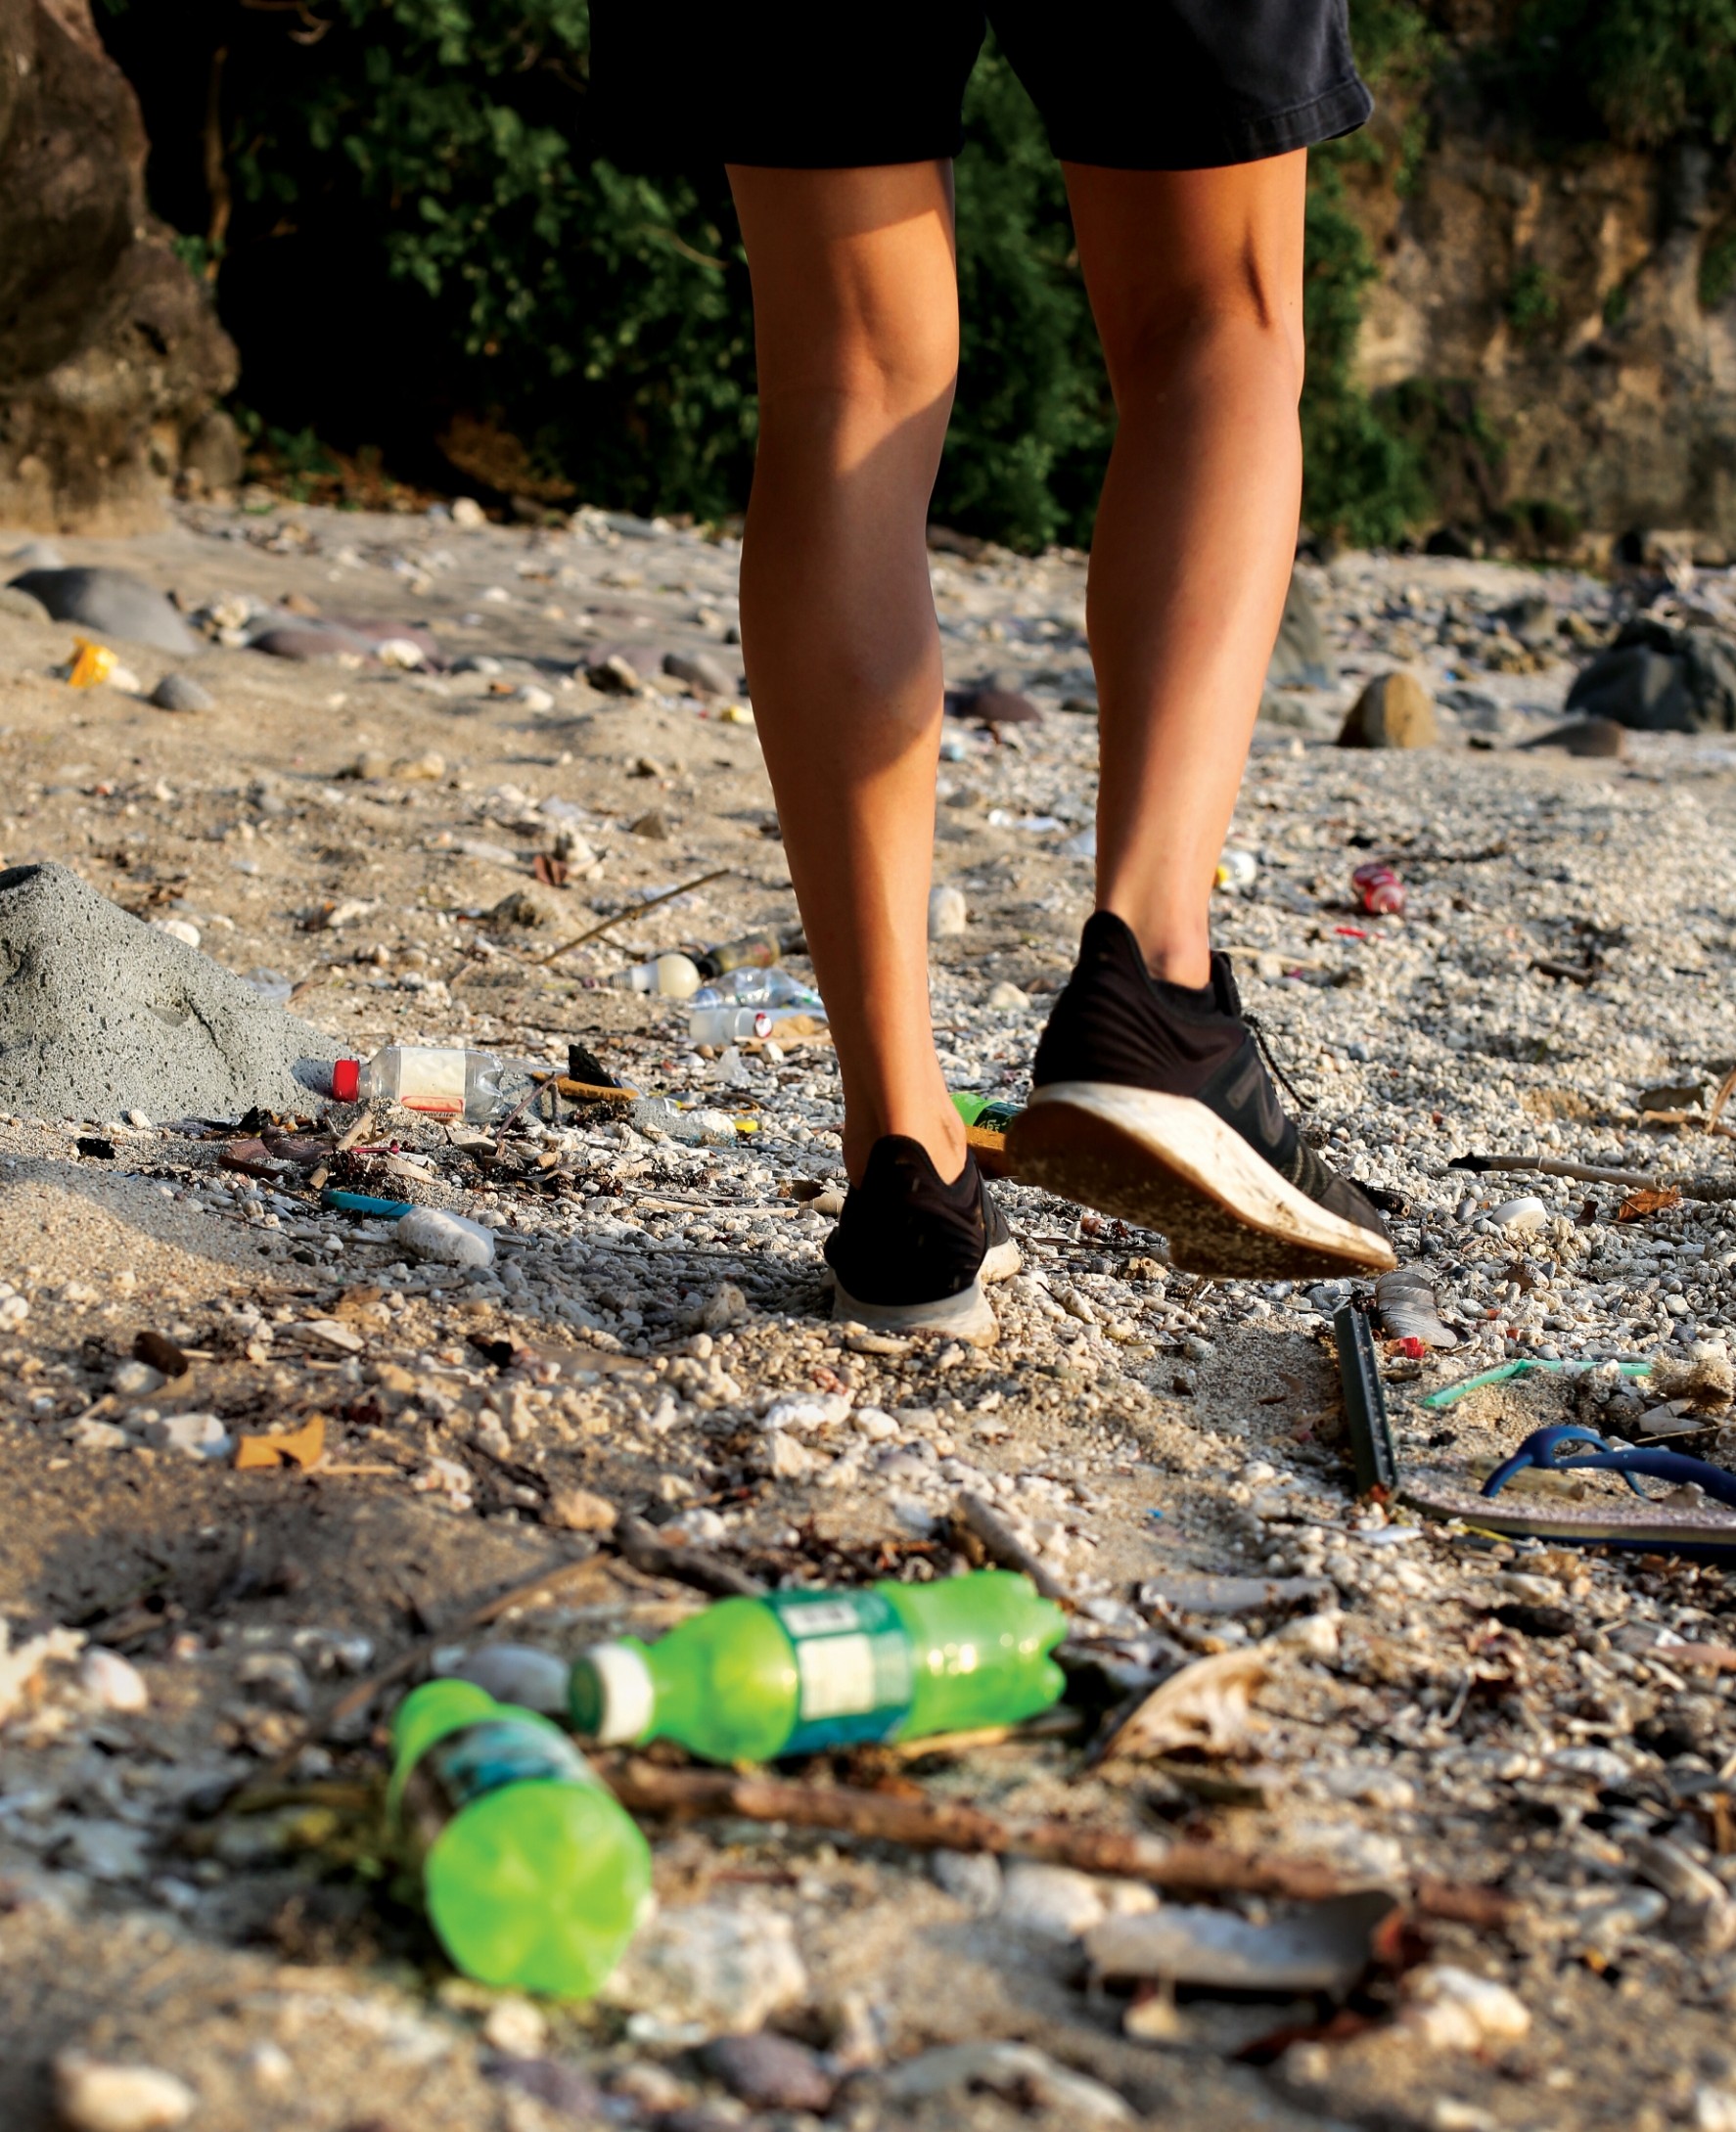 A person with only legs visible walks a trash-strewn beach.